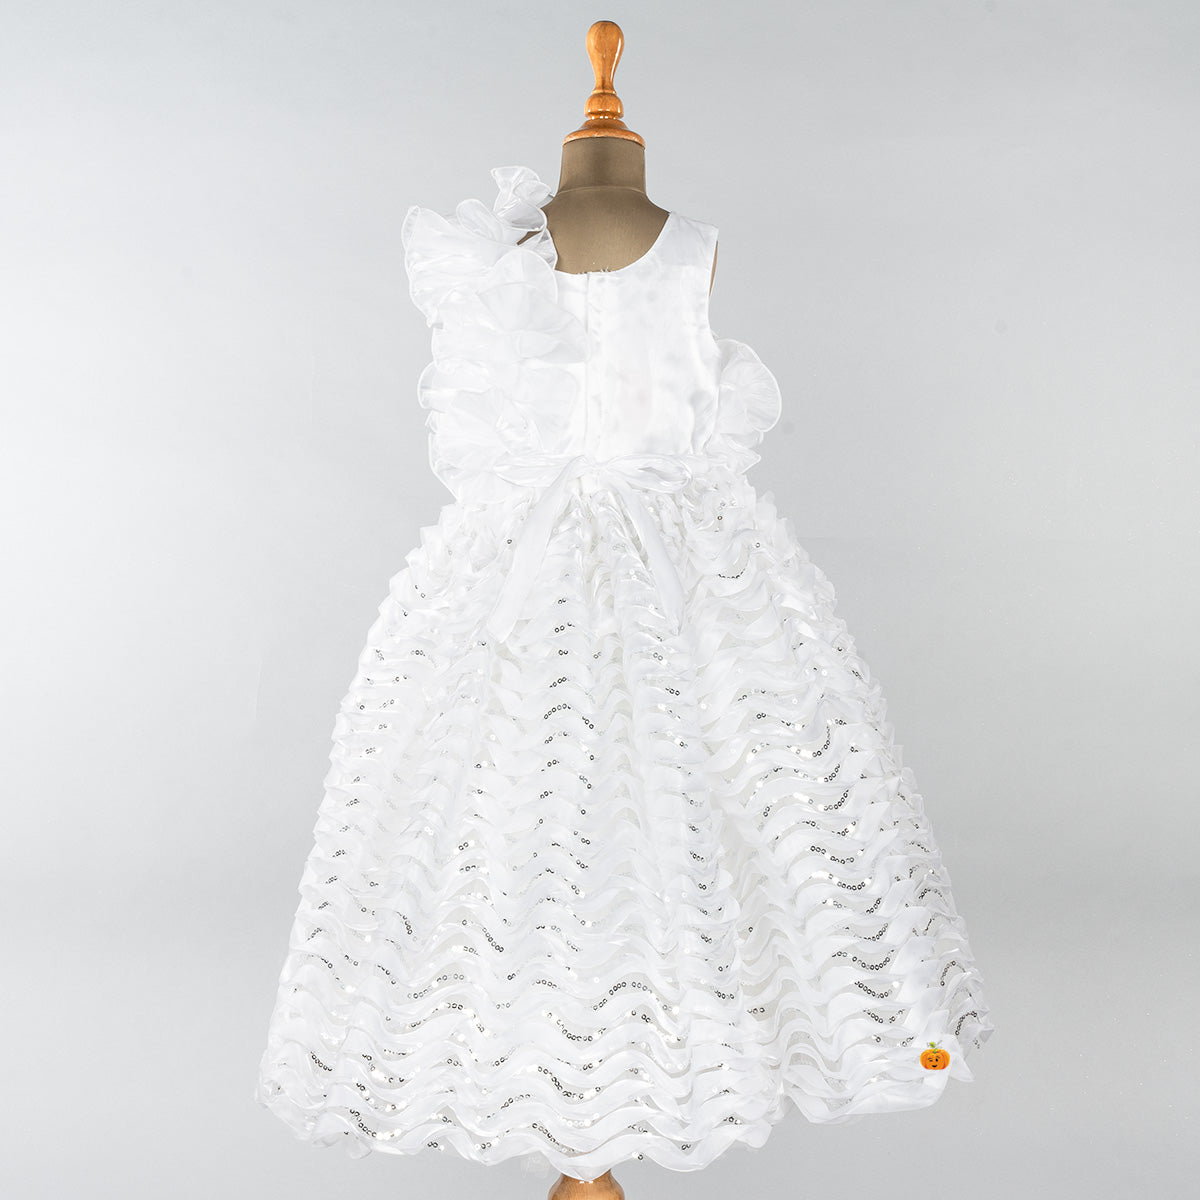 Girls Summer Mesh Dress, Flower Print, 3 12 Years Old, Child Clothes From  Bai09, $13.14 | DHgate.Com